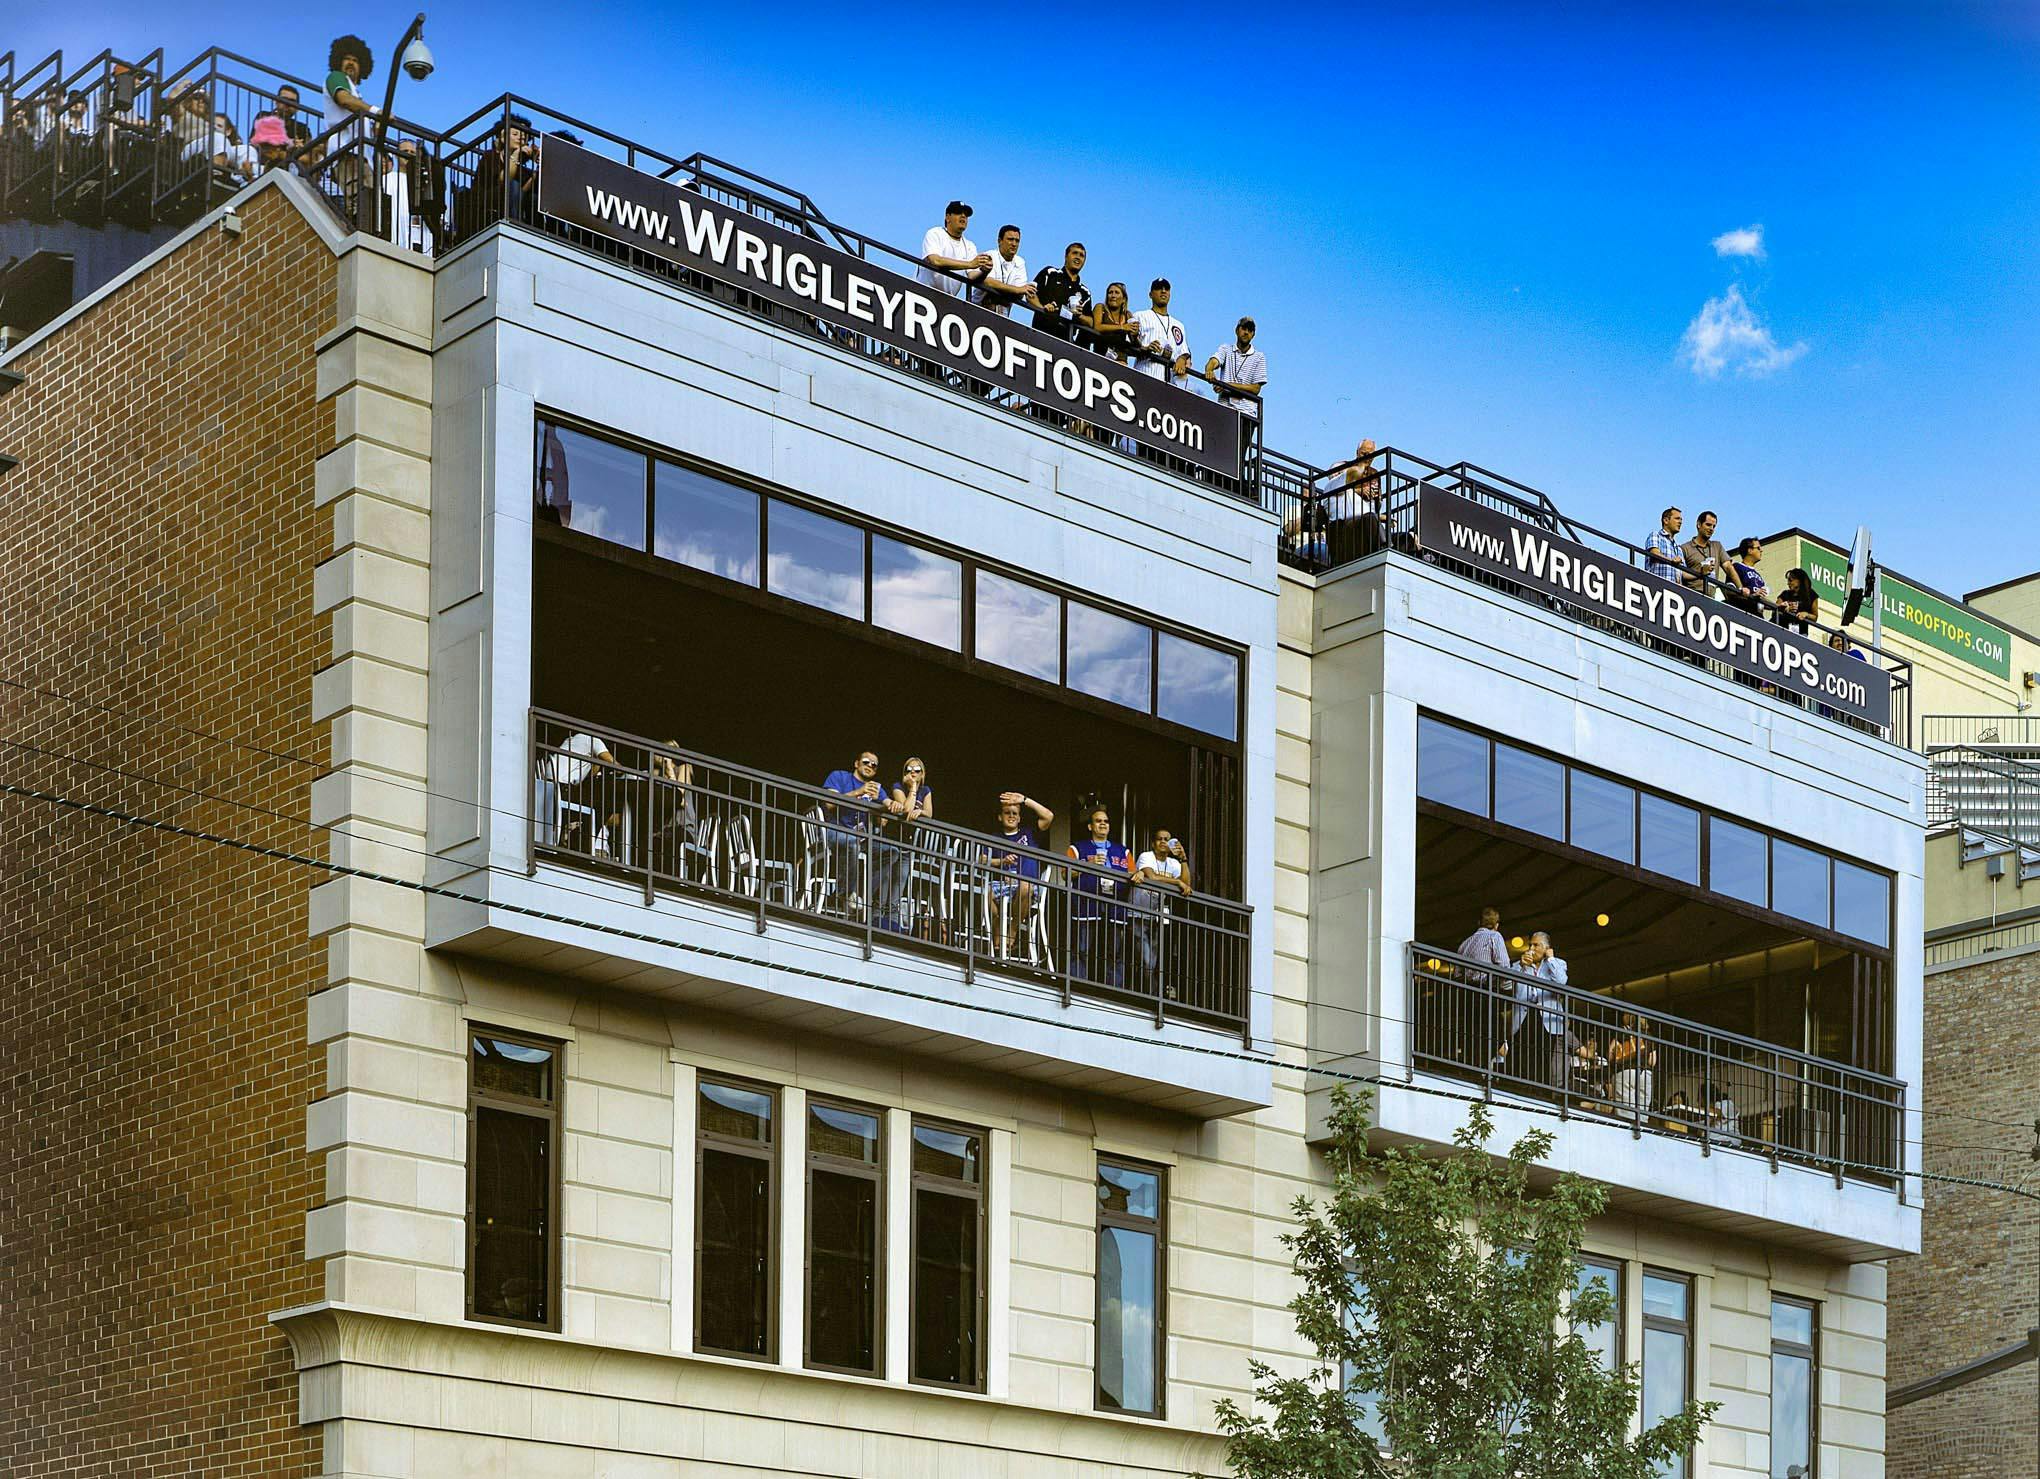 wrigley rooftops with folding glass walls open for viewing live games of baseball with patrons